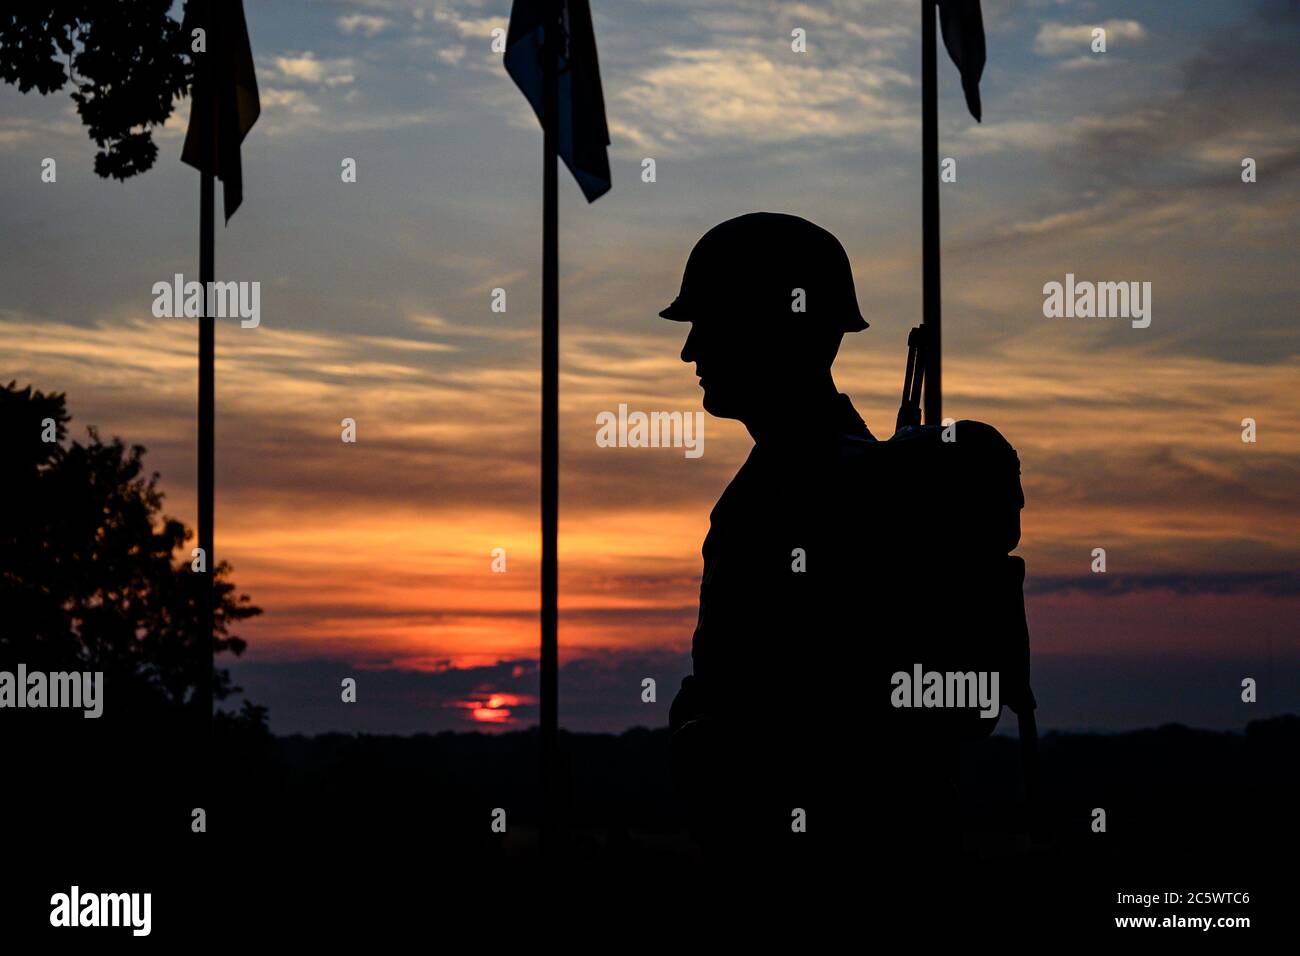 ST. LOUIS, MISSOURI/ UNITED STATES - Sunrise on Saturday, July 4, 2020, at The Battle of the Bulge National Monument in Jefferson Barracks Historic Si Stock Photo